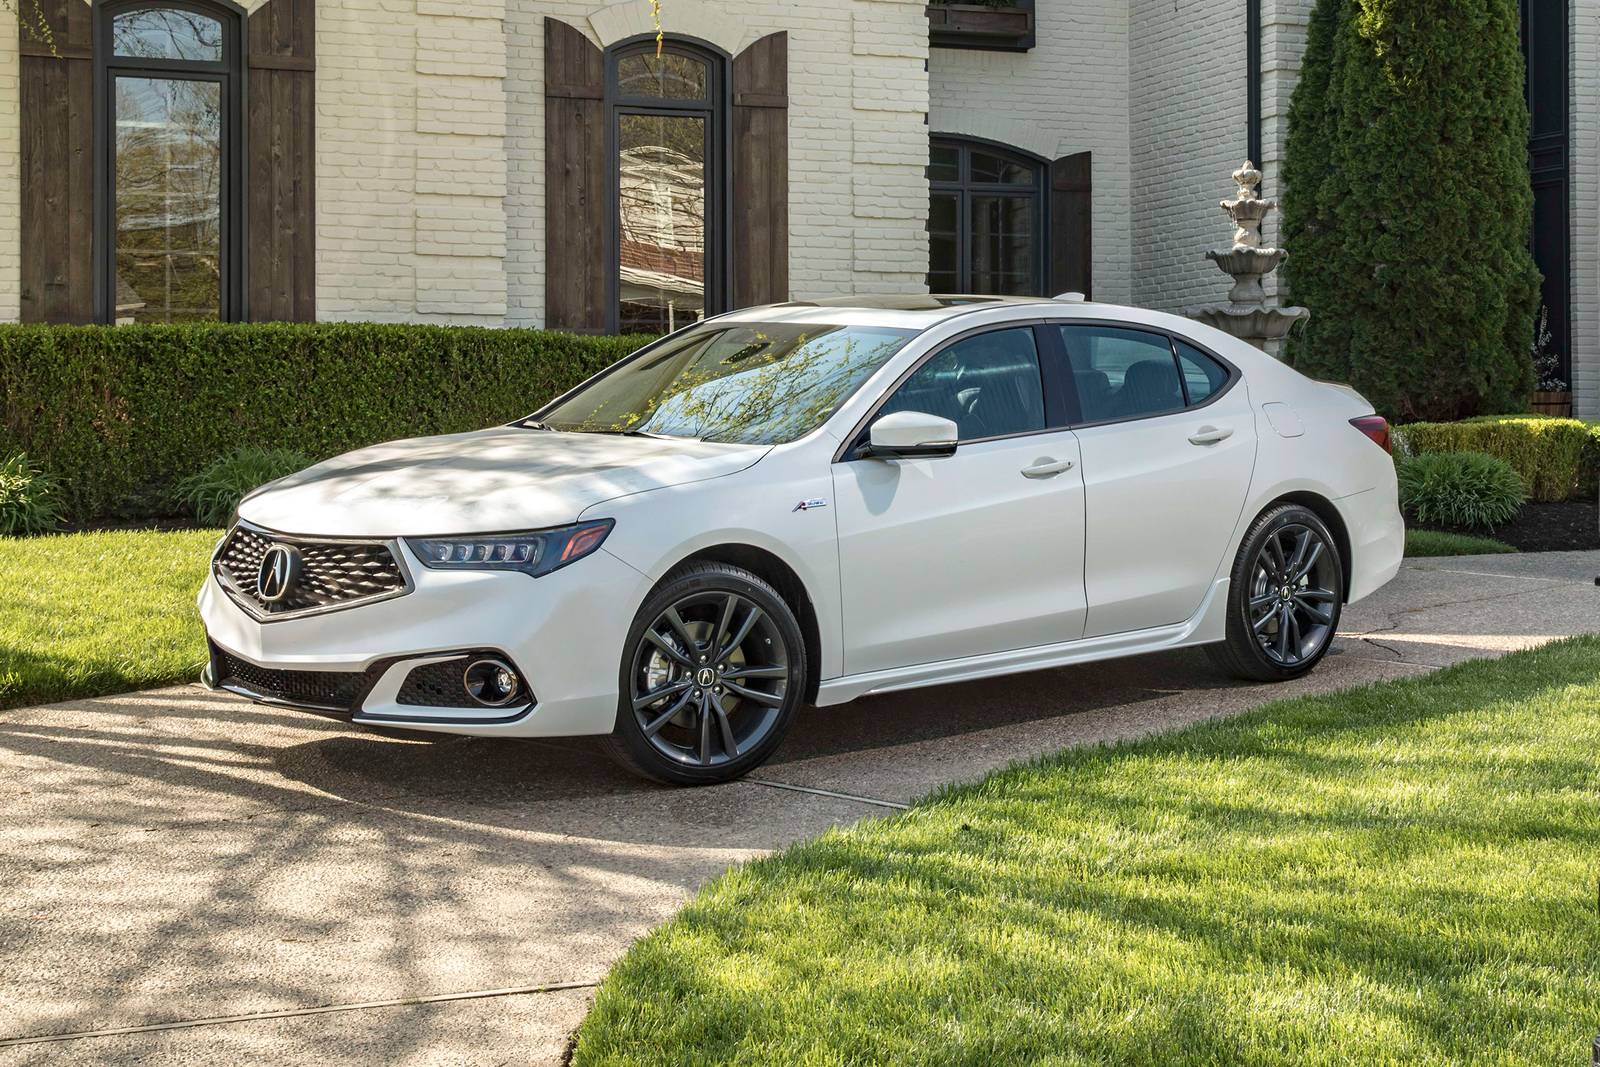 2020 Acura TLX Review & Ratings | Edmunds